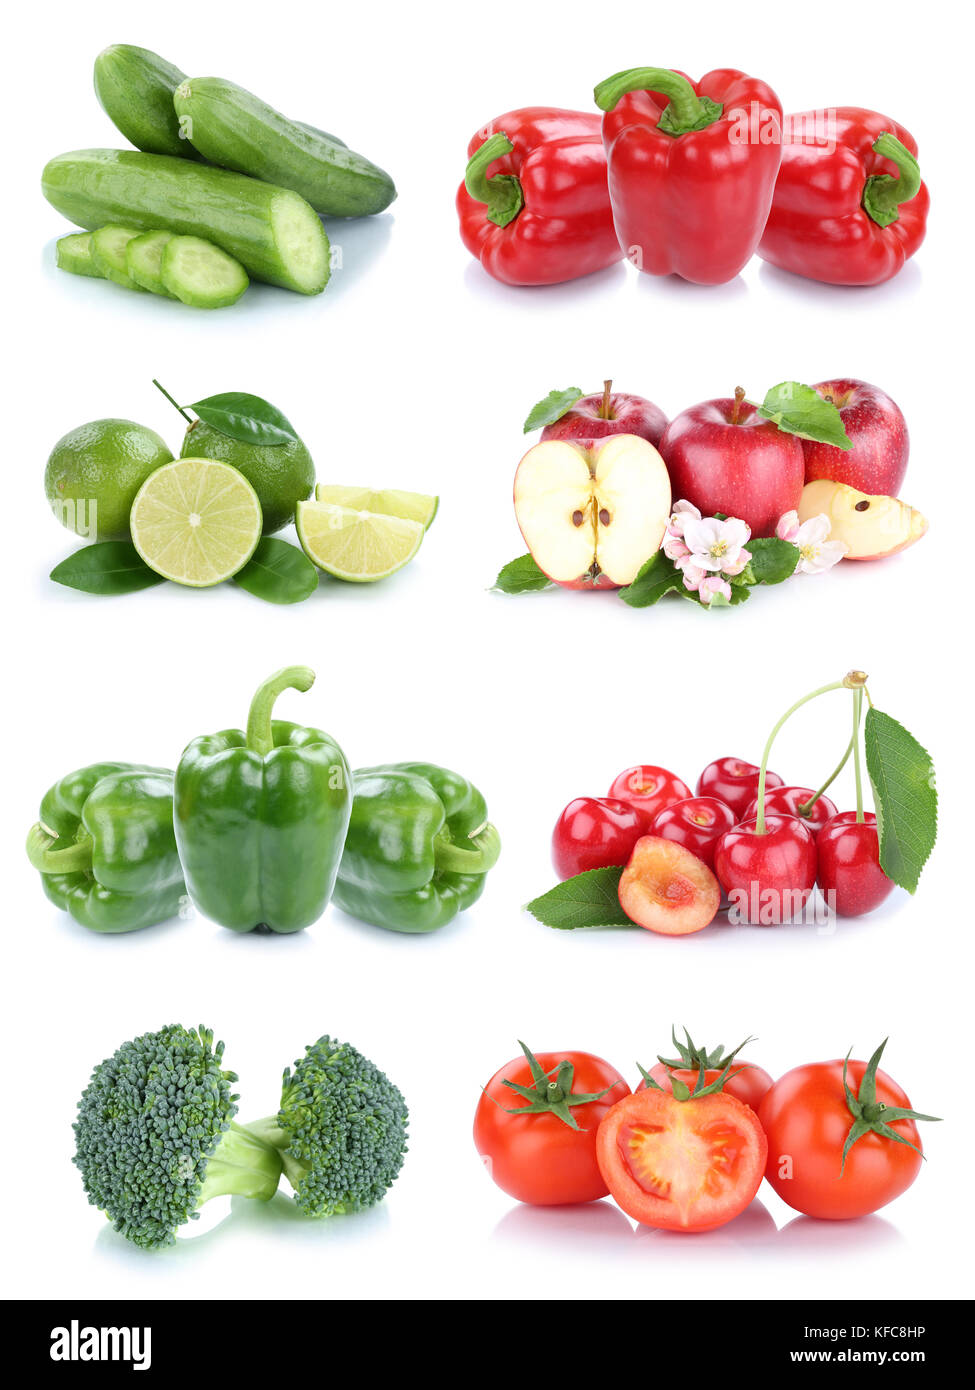 Fruits and vegetables collection isolated apples tomatoes bell pepper colors fruit on a white background Stock Photo